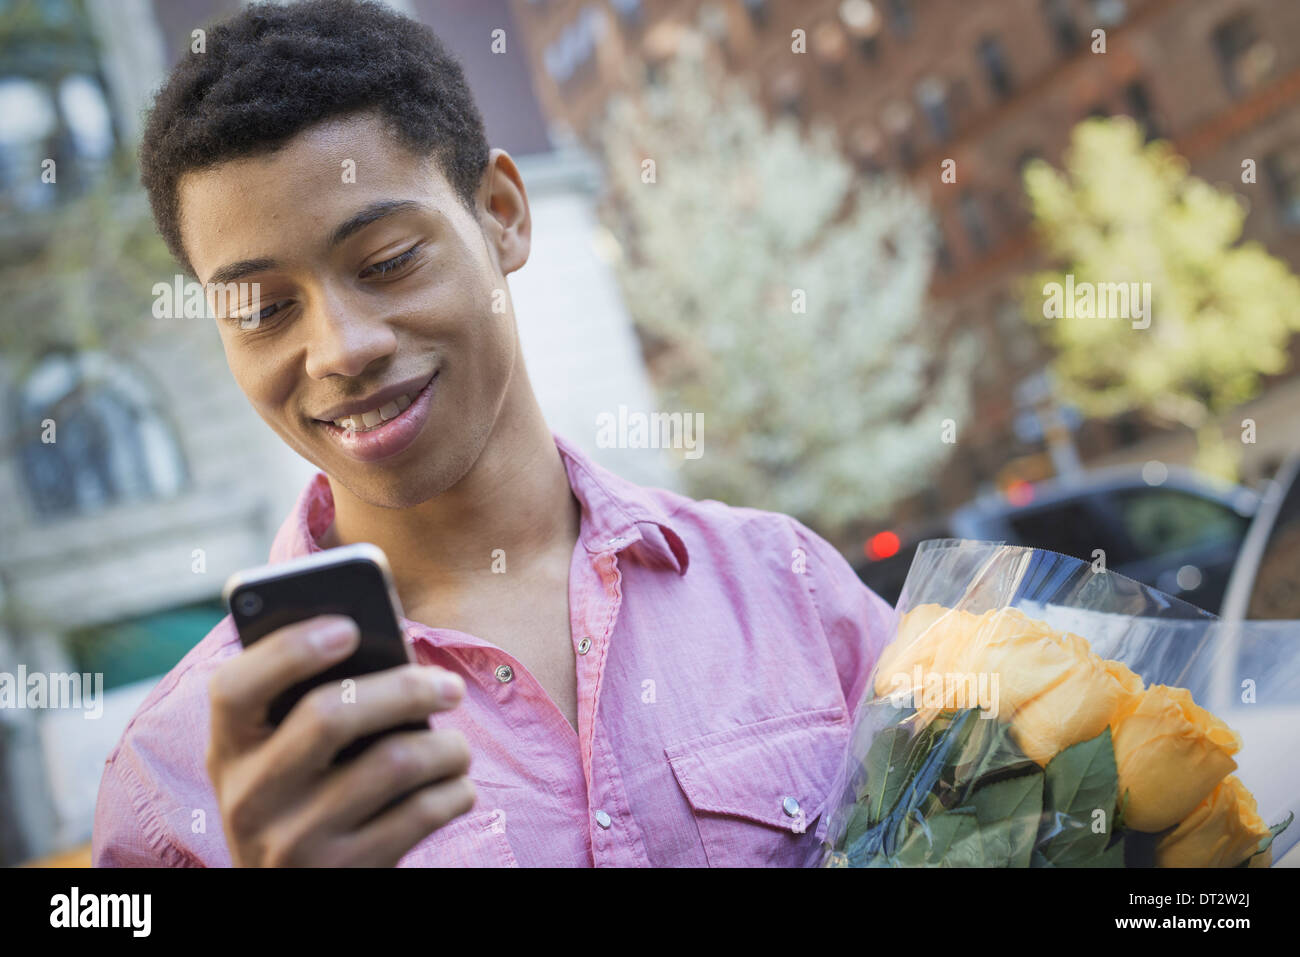 Urban Lifestyle A young man with short black hair wearing a pink casual shirt Holding a smart phone Stock Photo